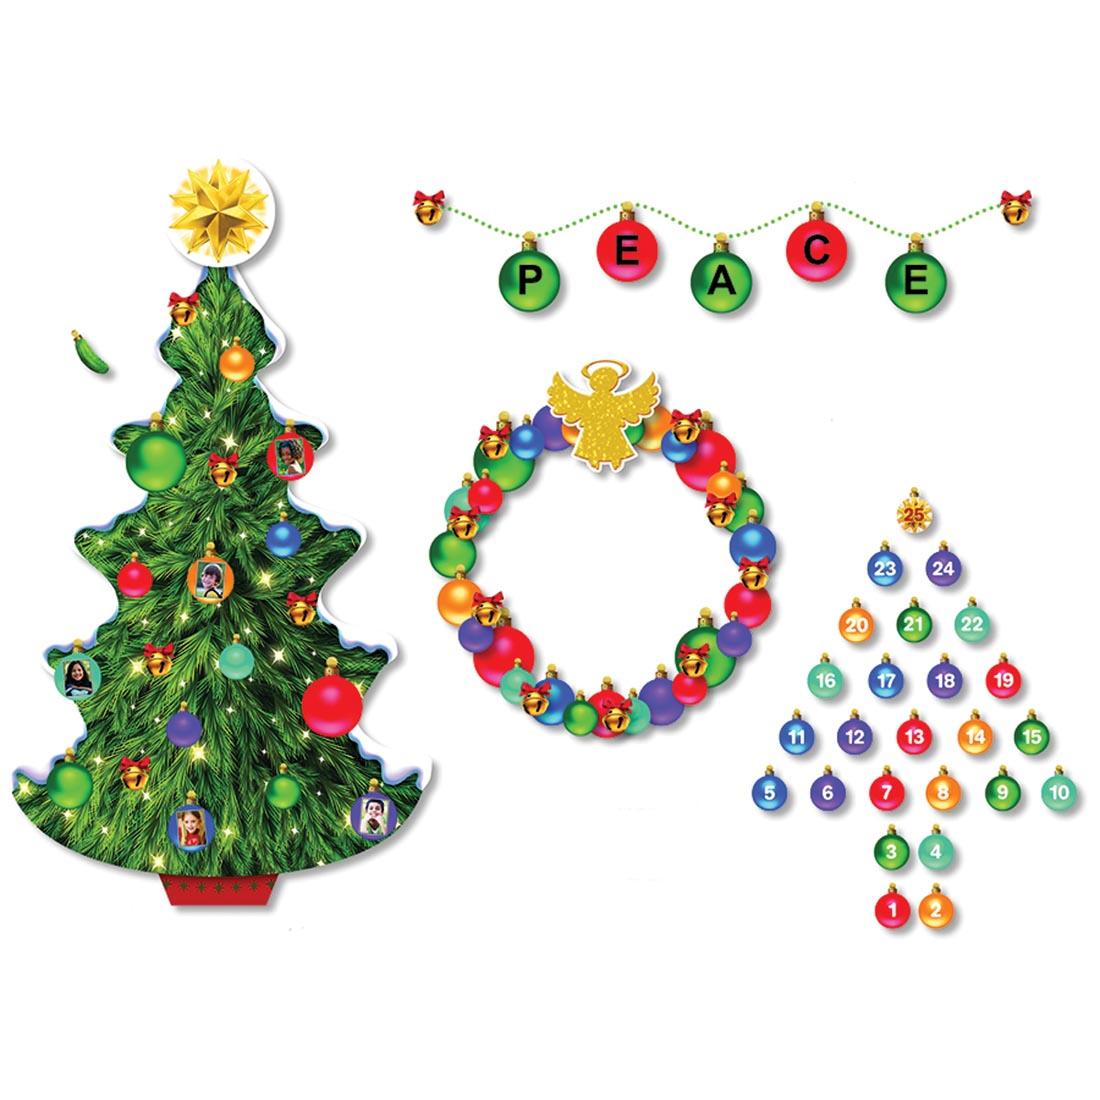 bulletin board set featuring Christmas tree and ornaments